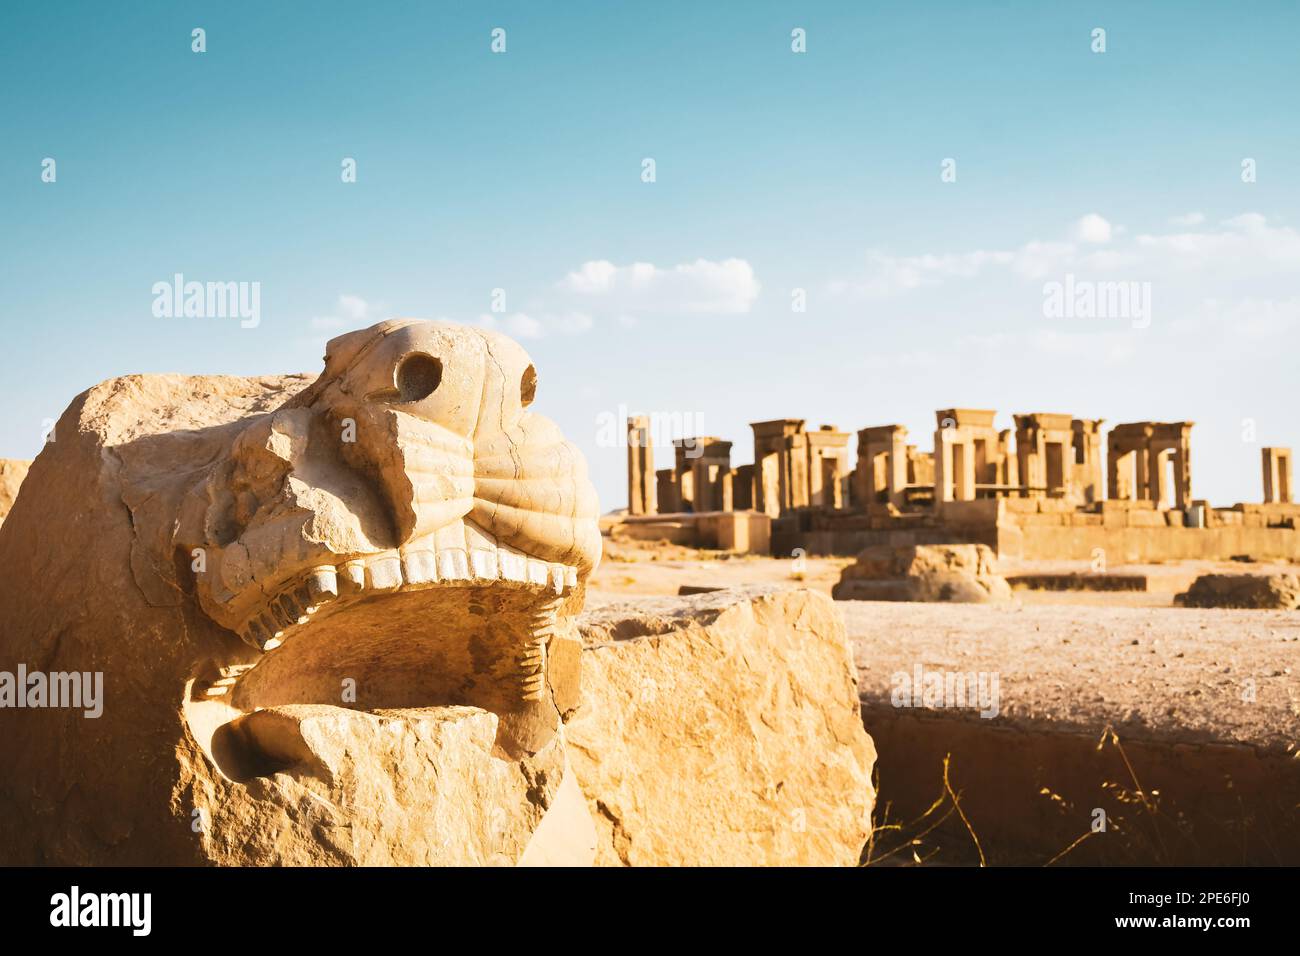 Persepolis, Iran - 8th june, 2022: lion statue head remains in Persepolis archeological ancient city site Stock Photo